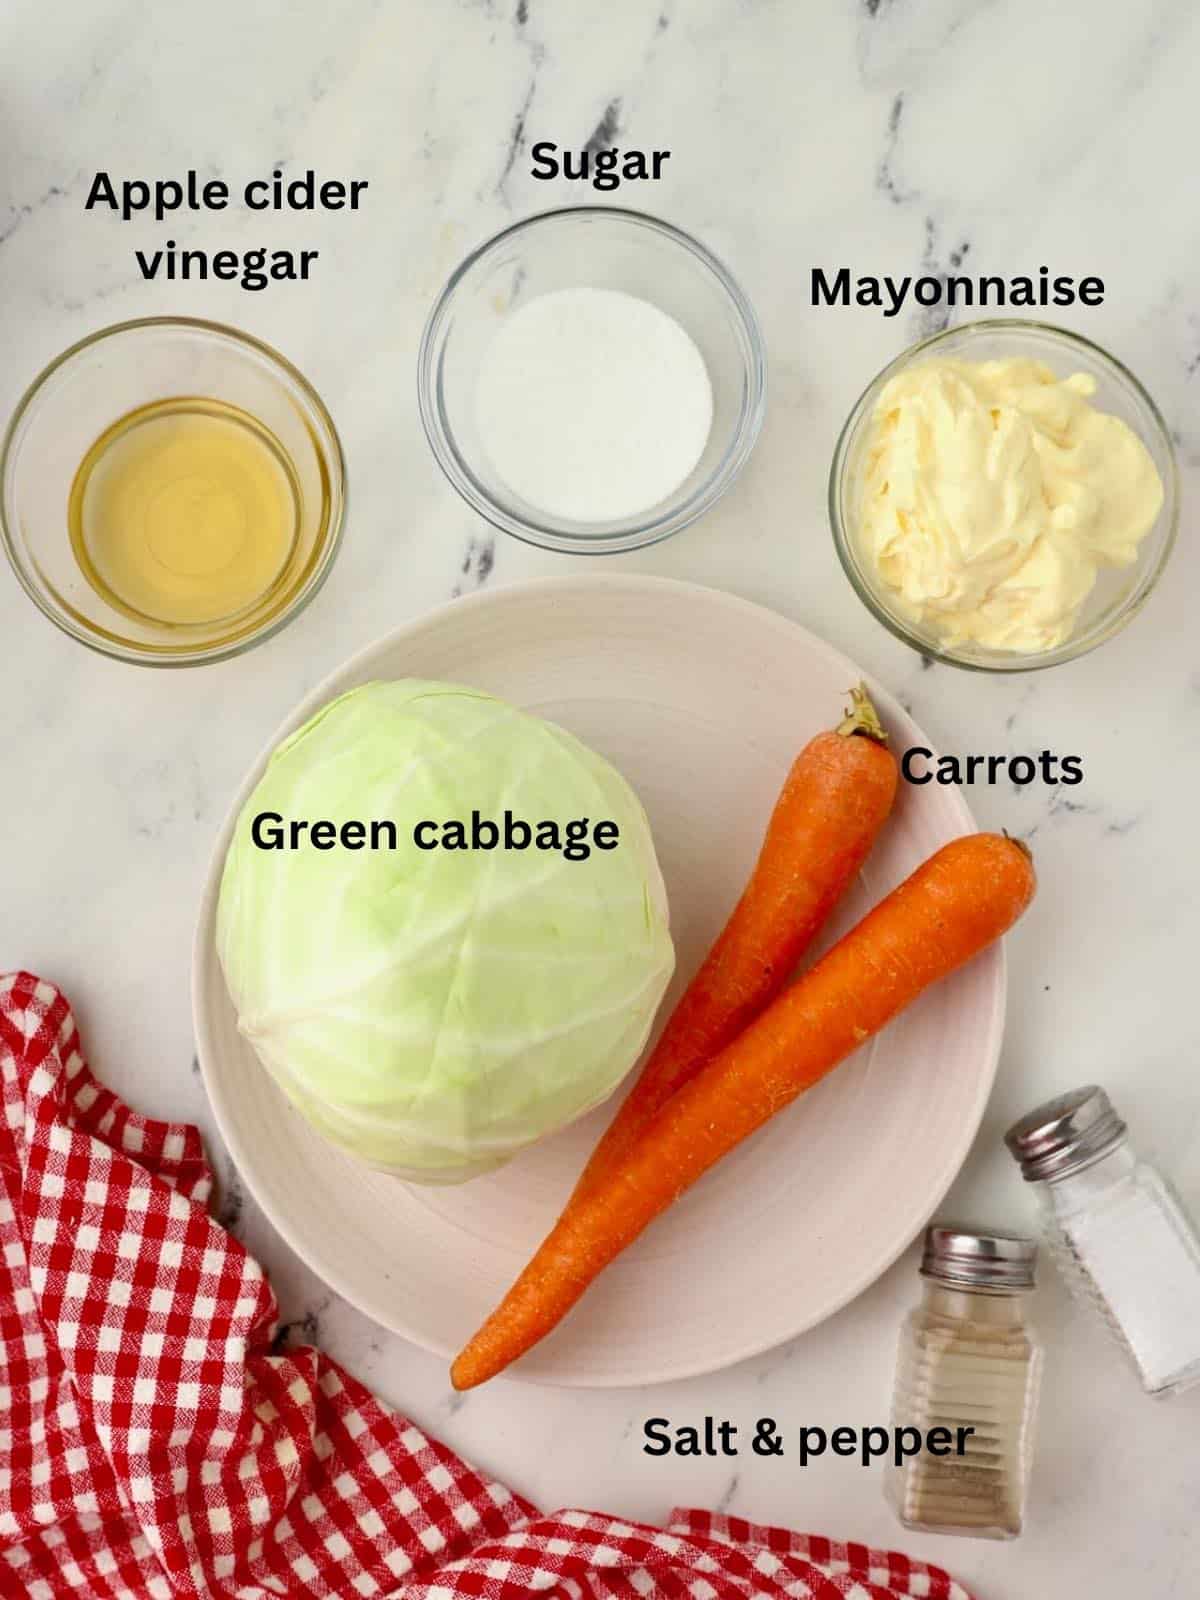 Coleslaw ingredients including a head of green cabbage, carrots and dresssing ingredients